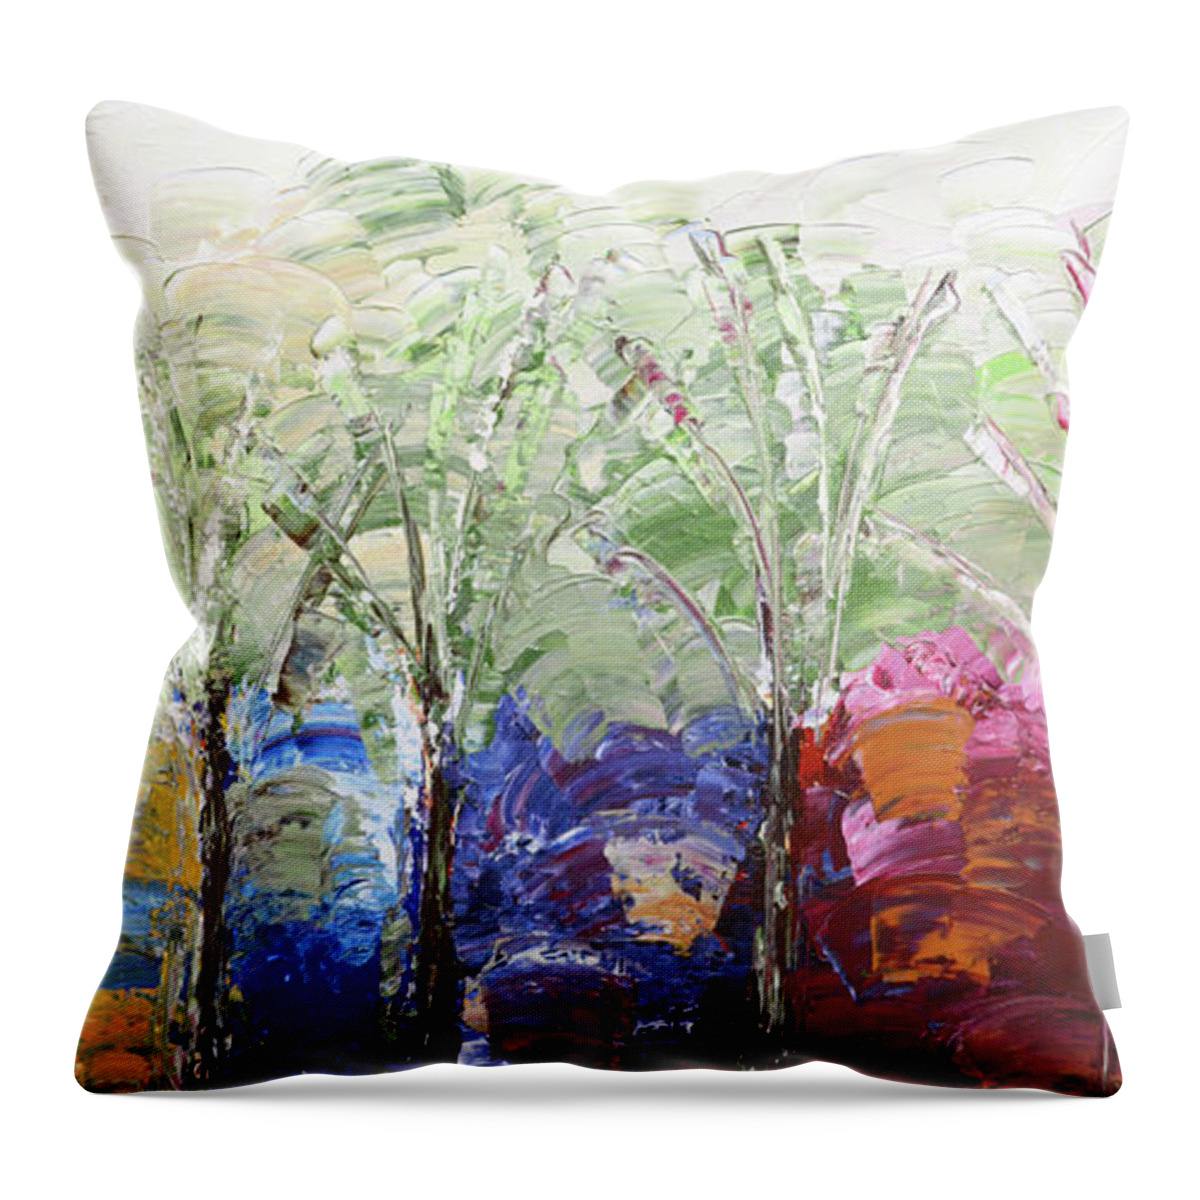 Beach Throw Pillow featuring the painting Beach Day by Linda Bailey